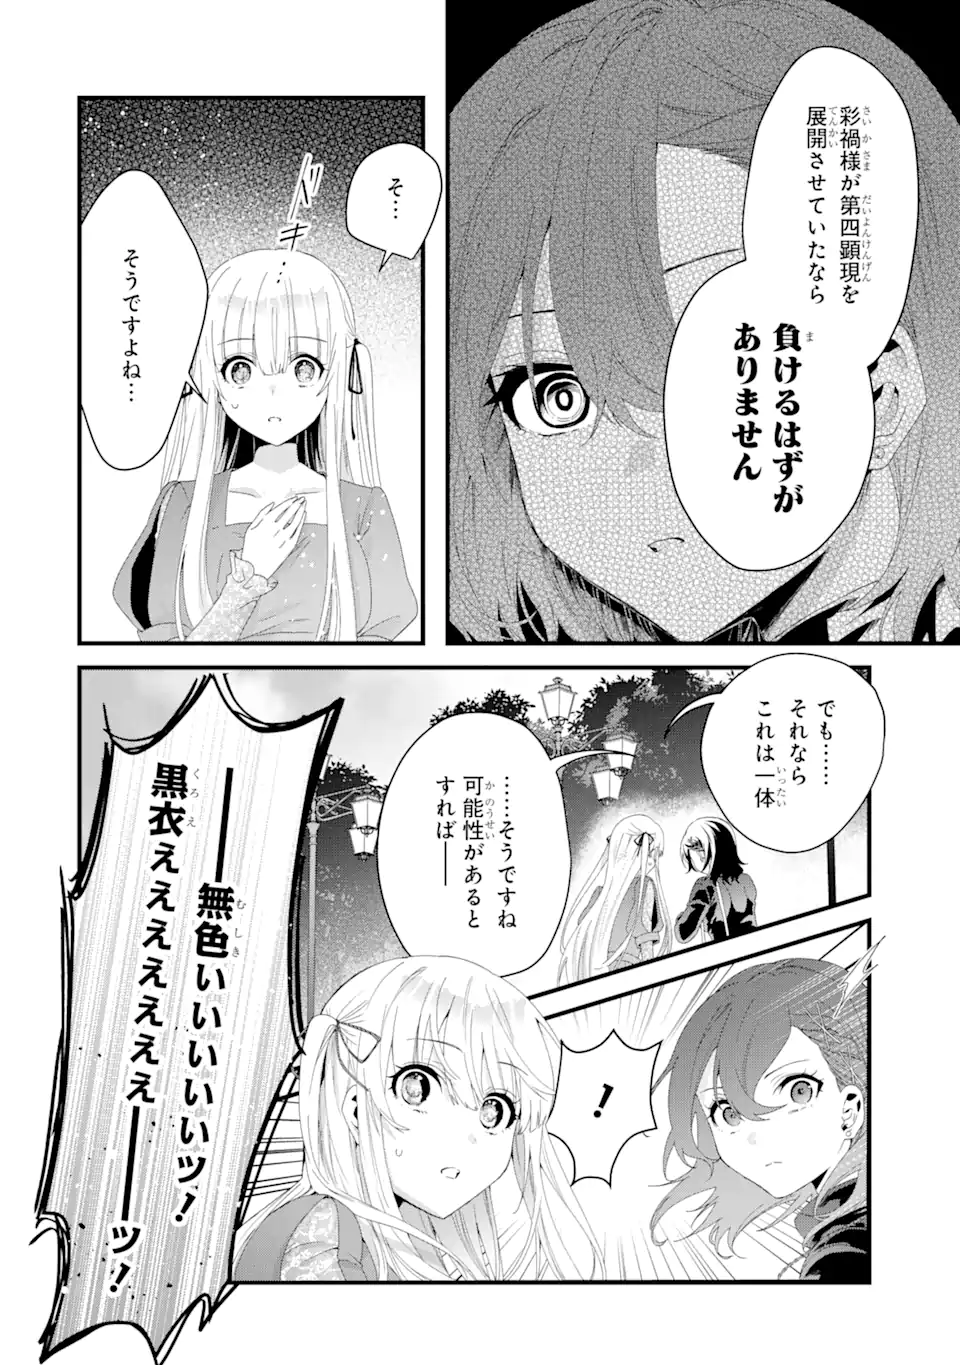 Ousama no Propose - Chapter 10.2 - Page 11